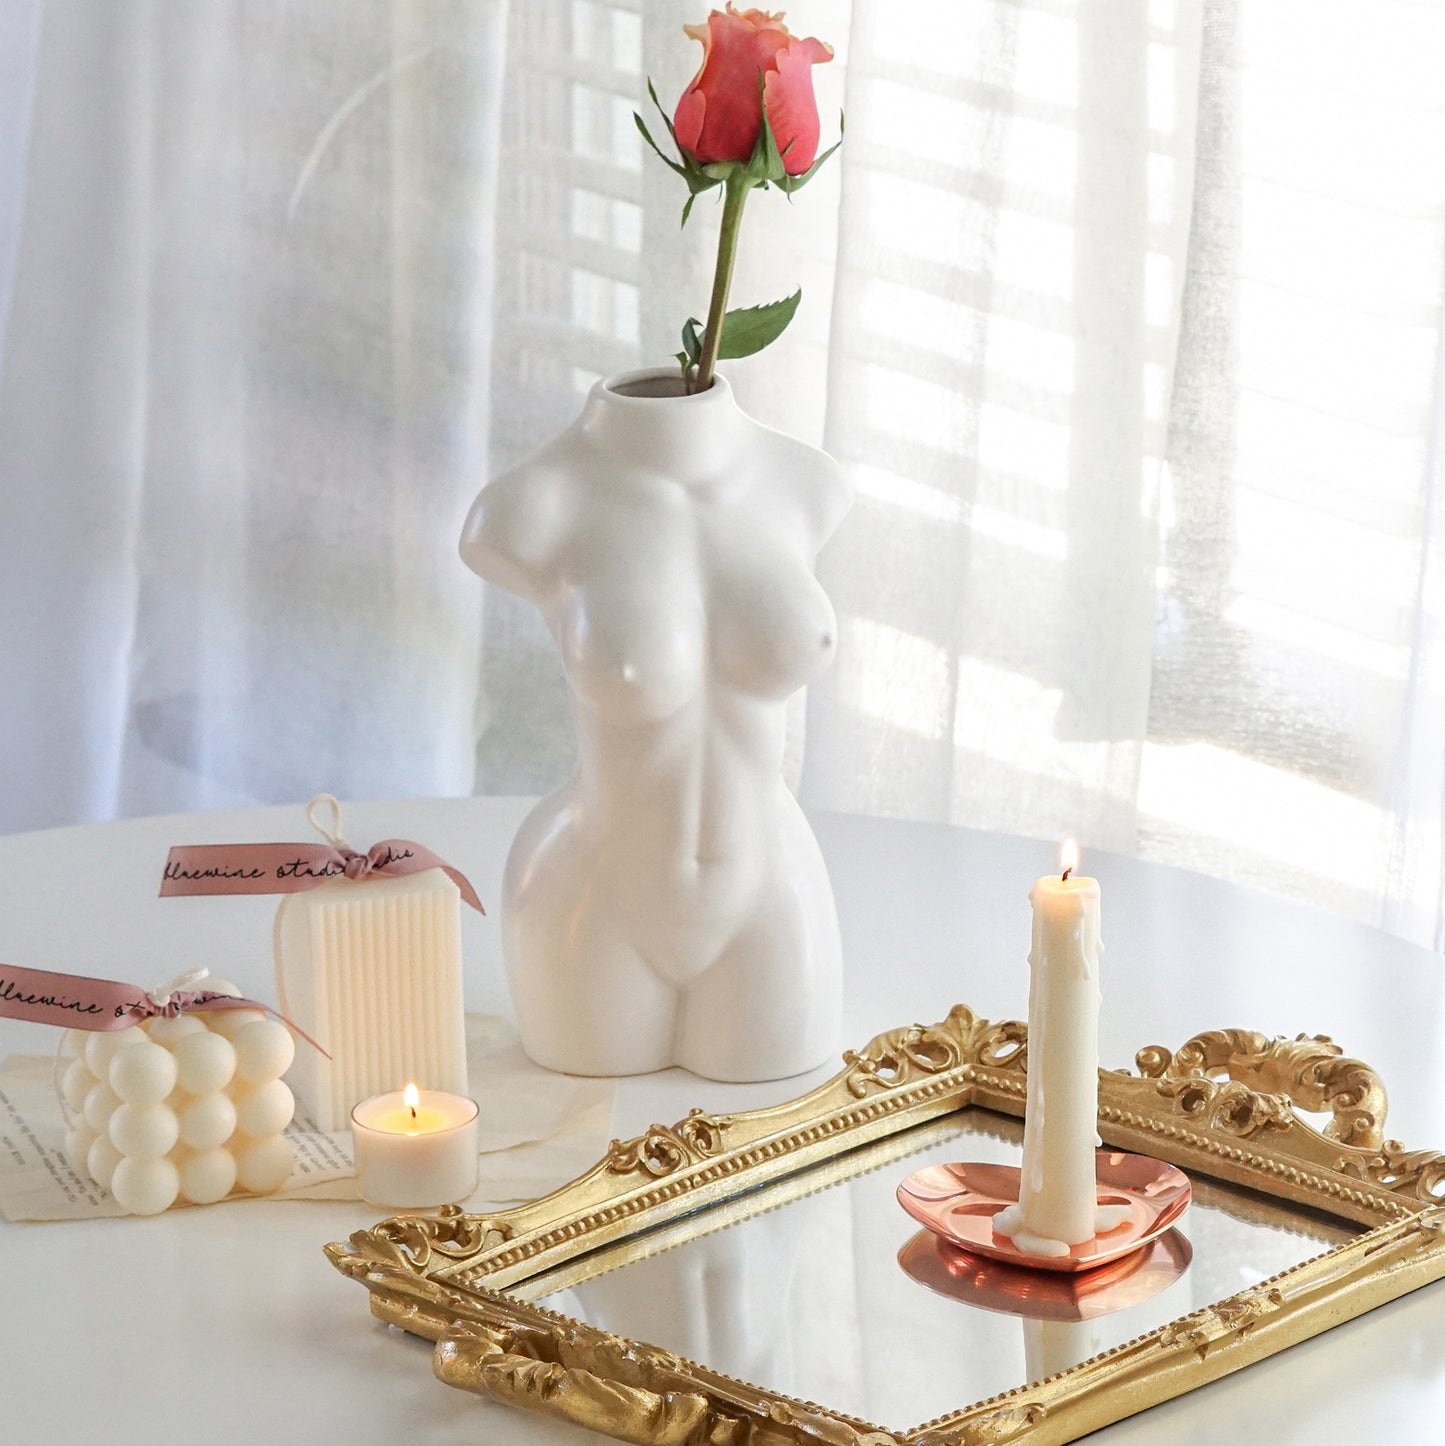 a lit taper candle on rose gold heart shape tray placed on rectangular gold french mirror tray, cube bubble soy pillar candle and ribbed square pillar candle with pink bluewine studio ribbons, a lit tealight candle, book pages, and a pink rose in a white ceramic feminine body shape vase